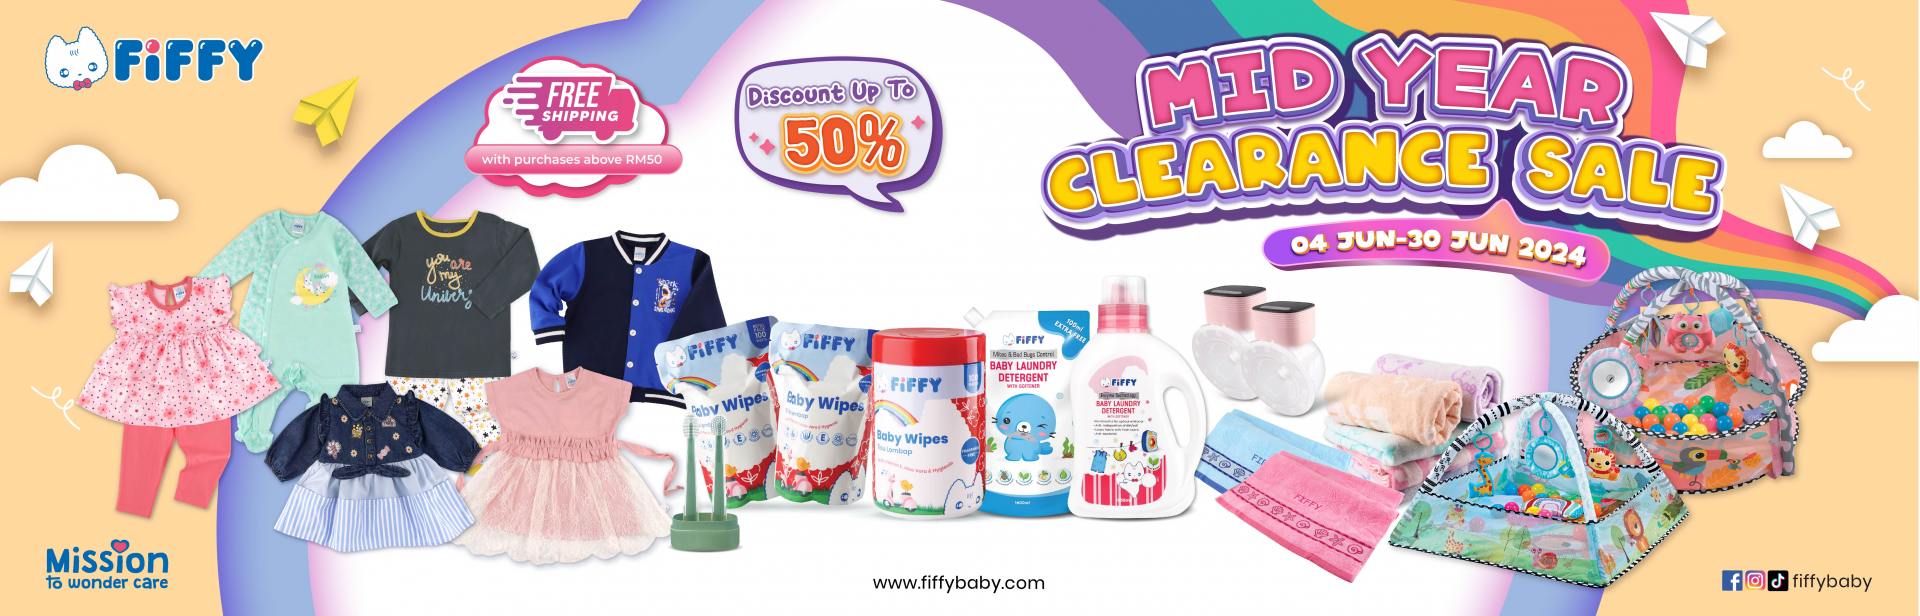 Fiffy Mid Year Clearance Sale